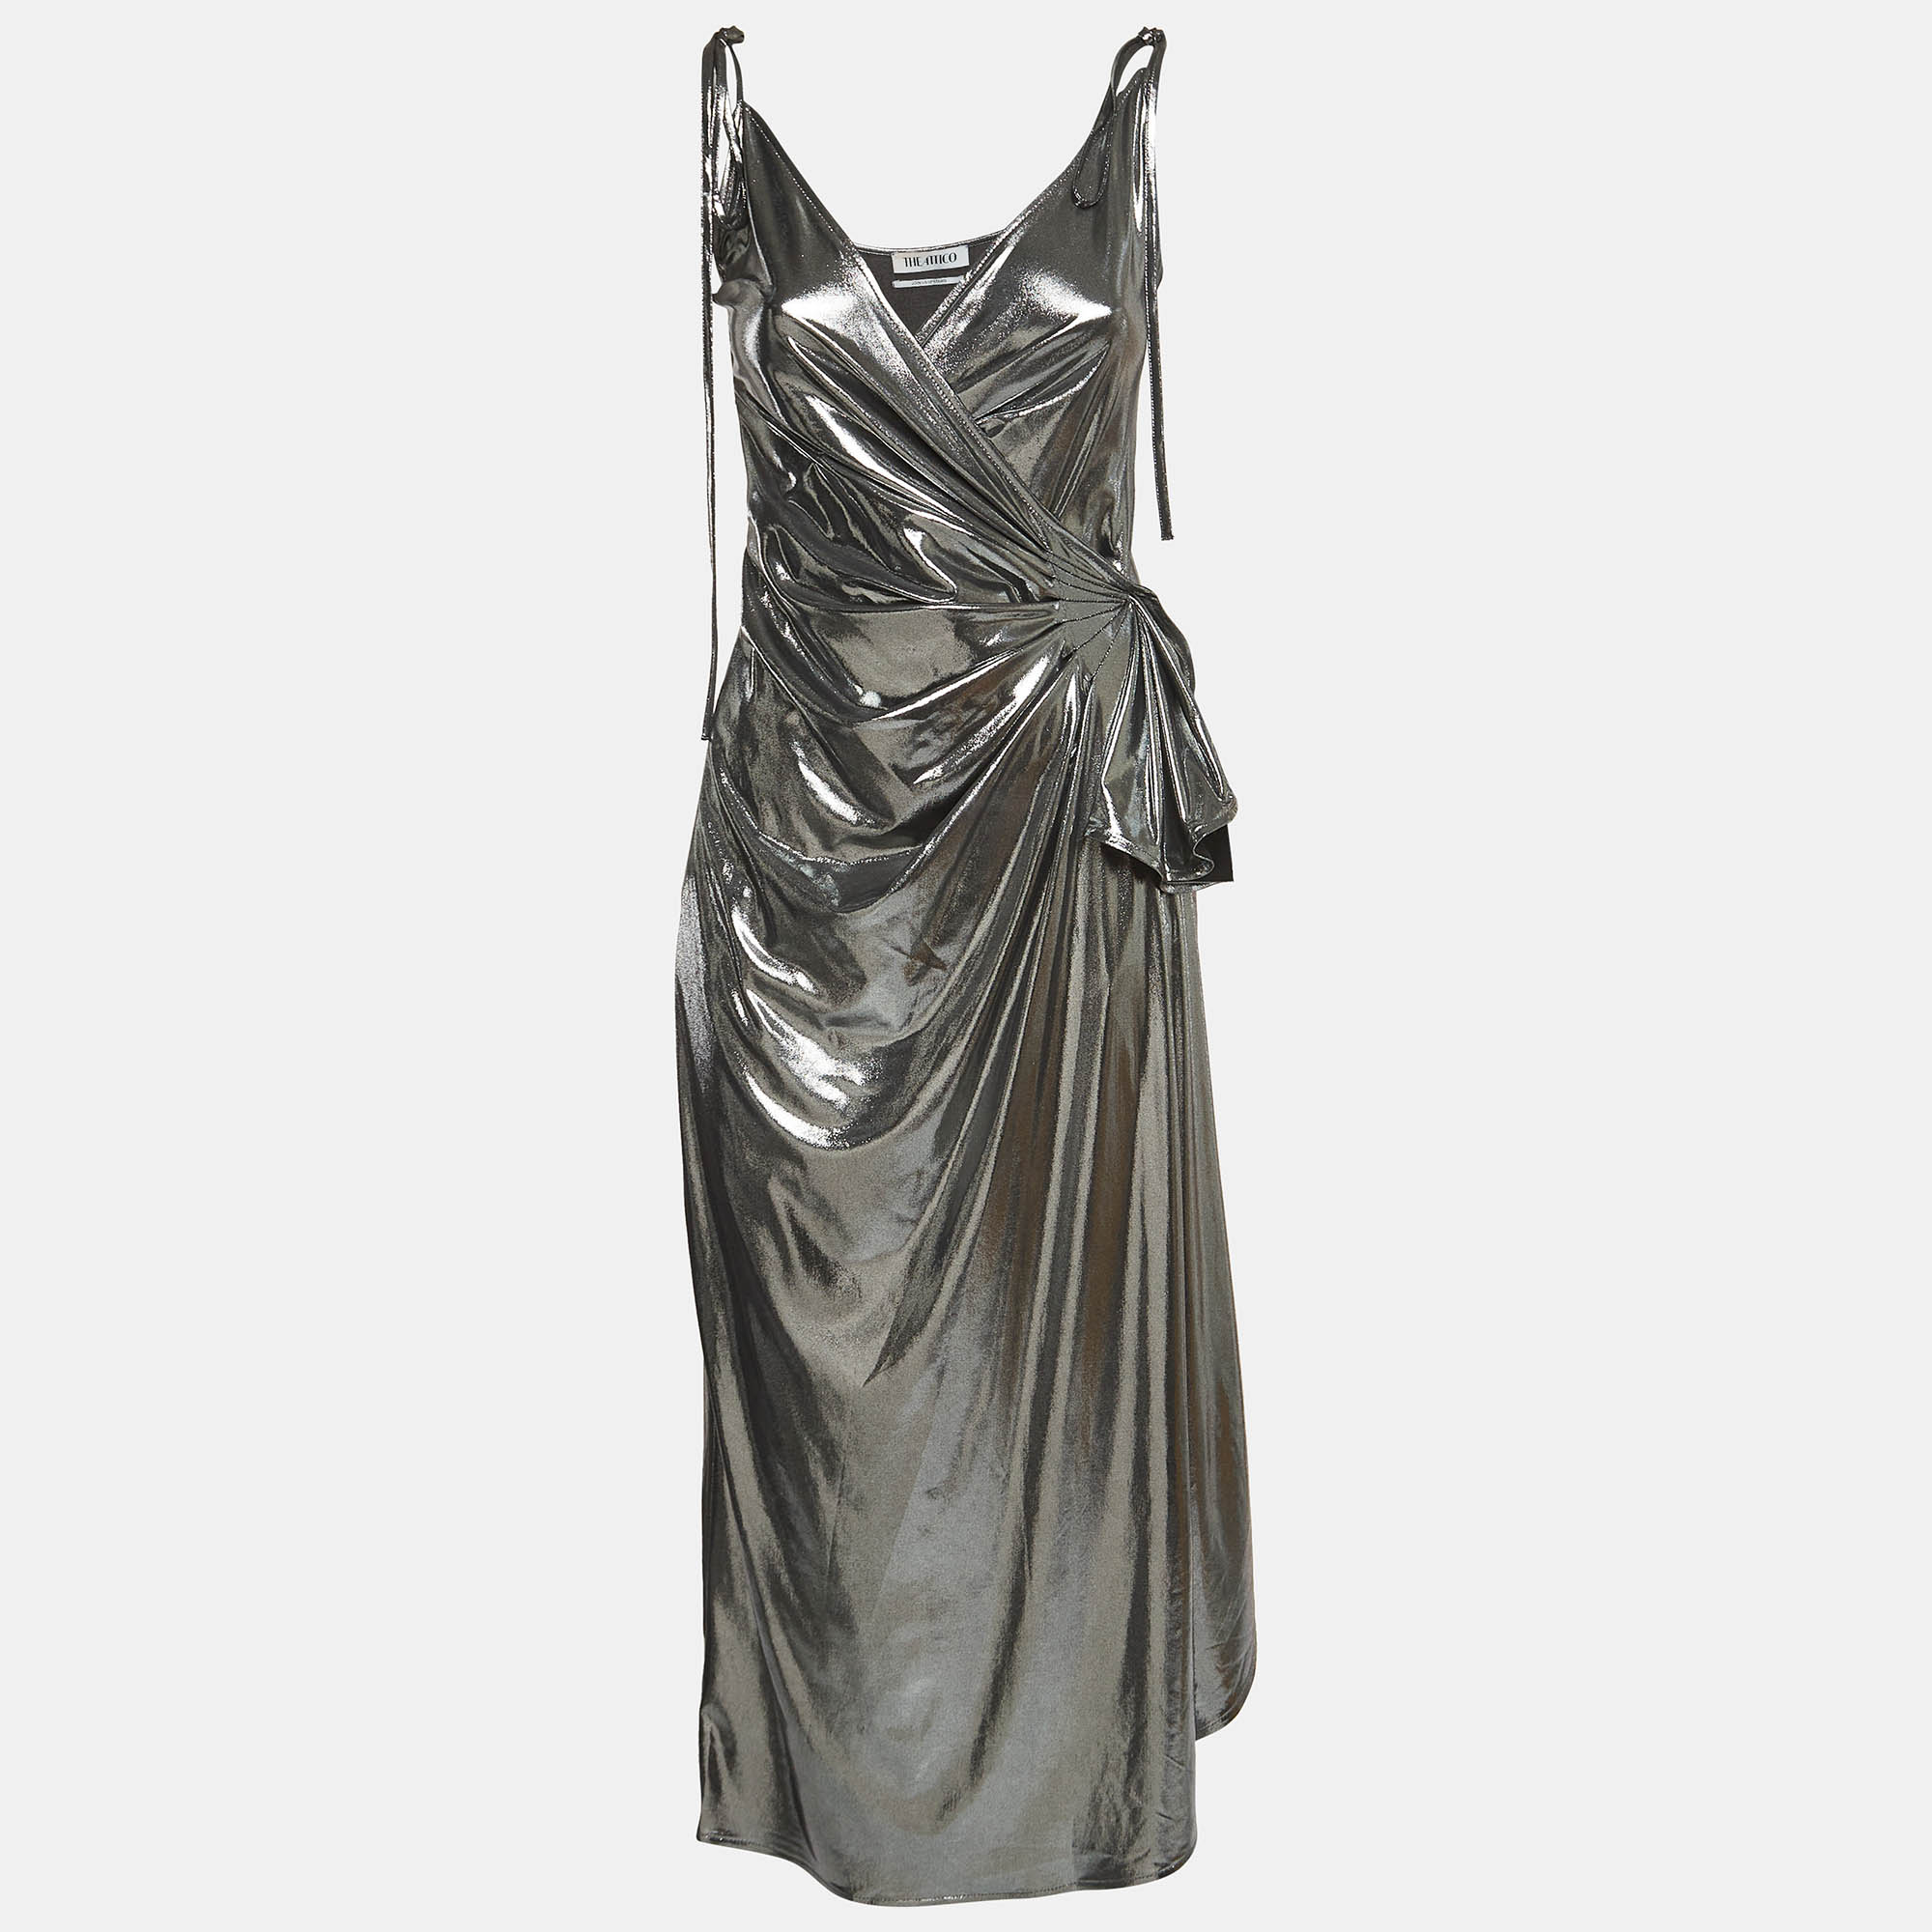 Dazzle in the Attico wrap dress a radiant ensemble that exudes elegance and glamour. Crafted with shimmering silver lamé fabric its figure flattering silhouette features delicate shoulder straps and a chic wrap design making it a captivating choice for any special occasion.